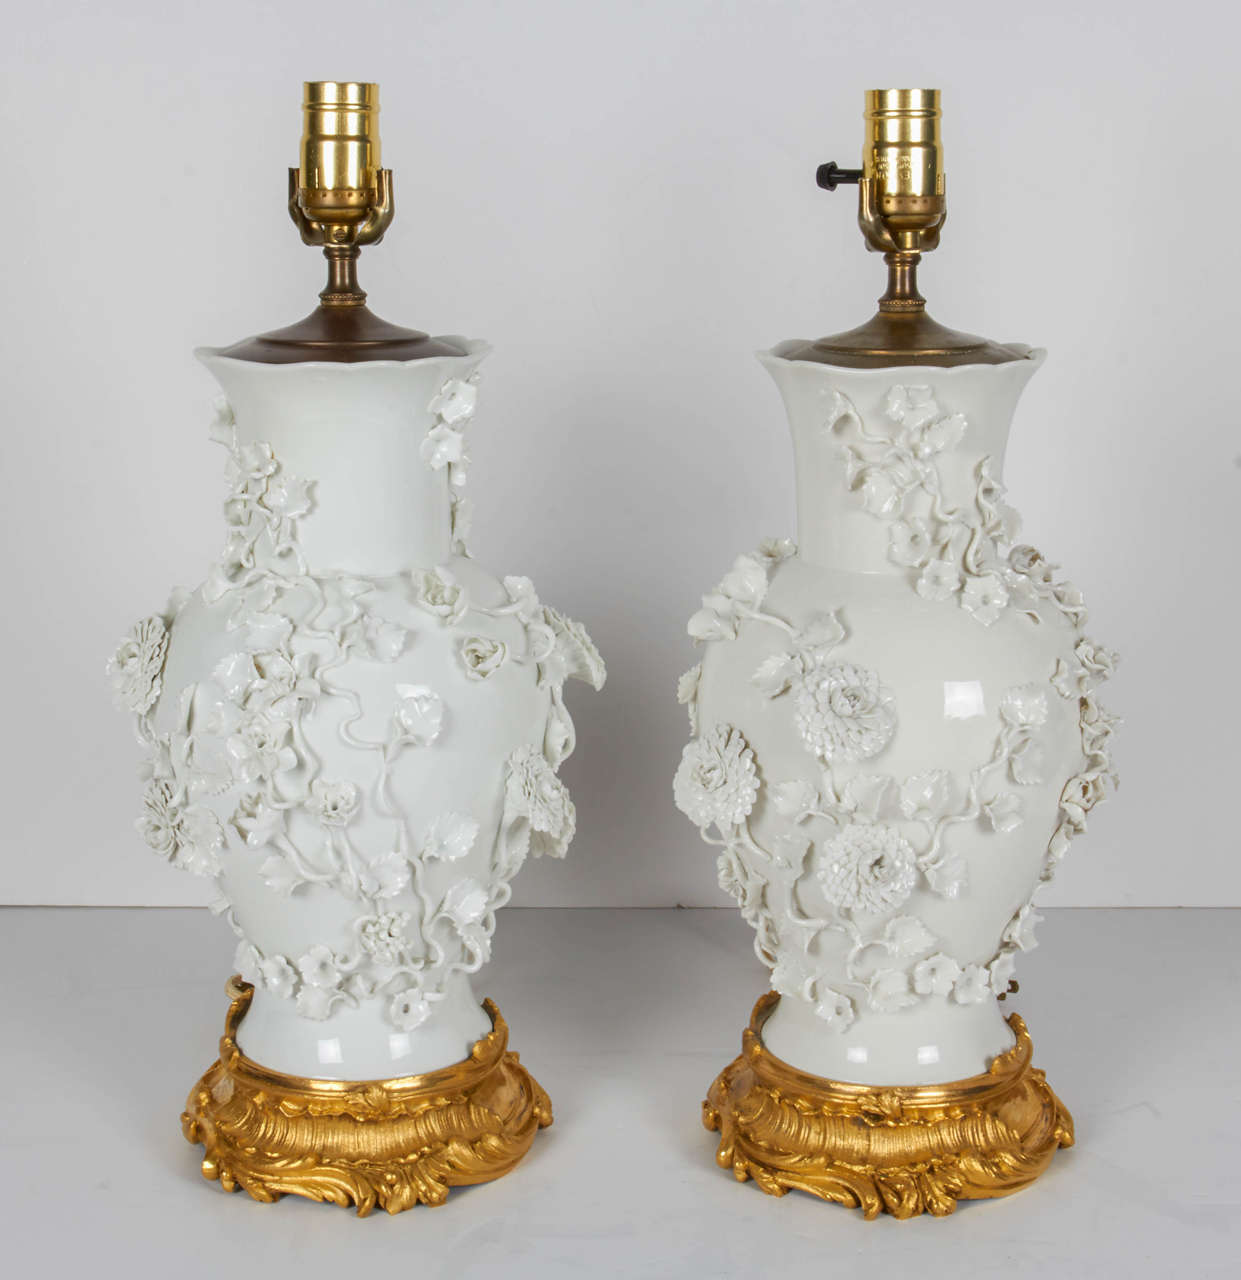 An unusual pair of antique Blanc de Chine porcelain vases mounted as lamps with Louis XV style richly carved ormolu bases. Each baluster shaped vase is embellished in relief with porcelain flowers and leaves, circa mid-1800s. Later, converted to